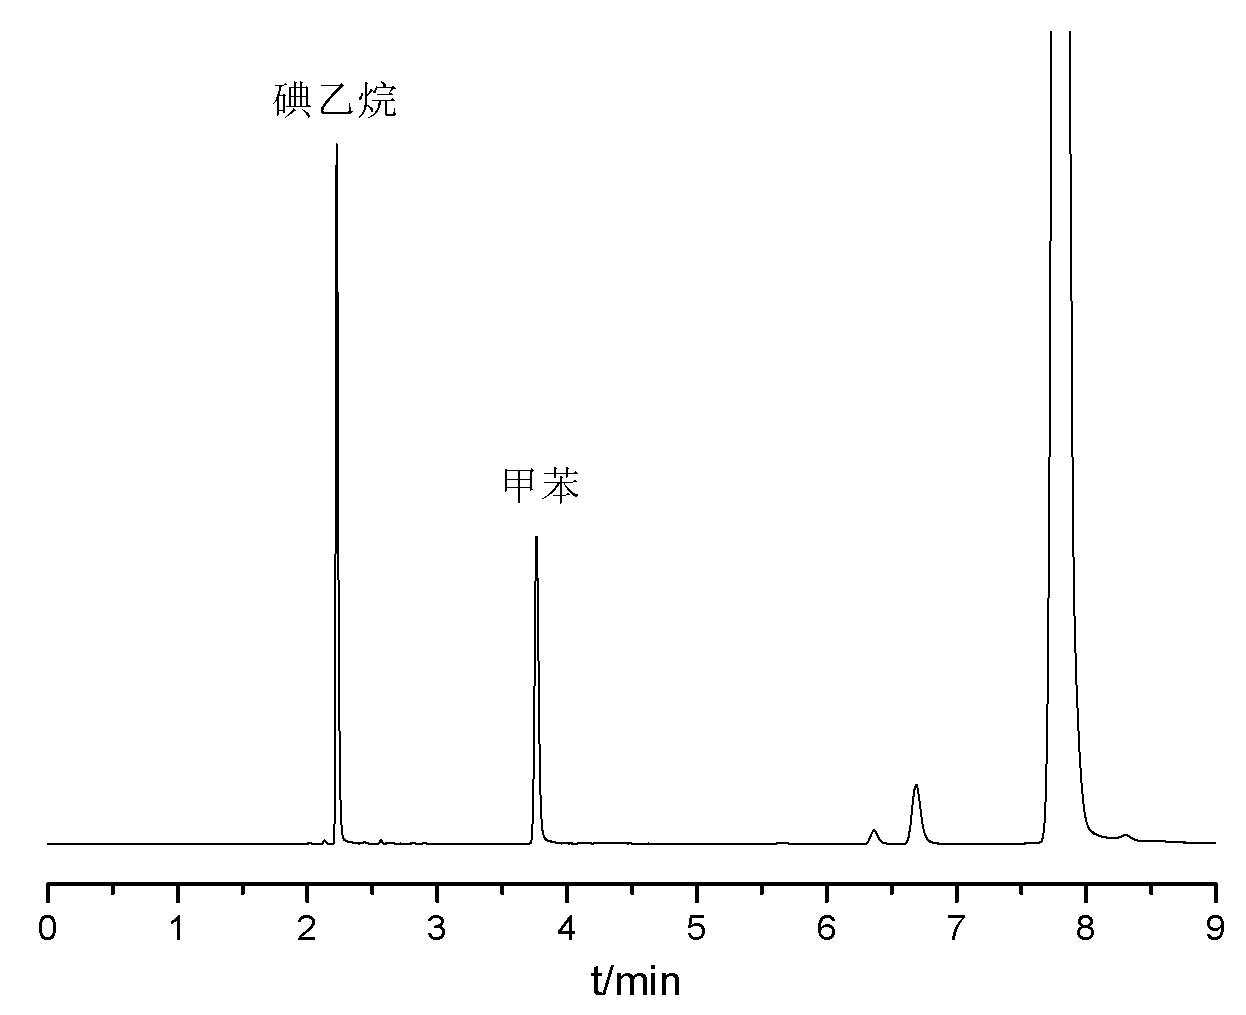 Method for measuring ethoxy content of ethyl cellulose by using headspace gas chromatography